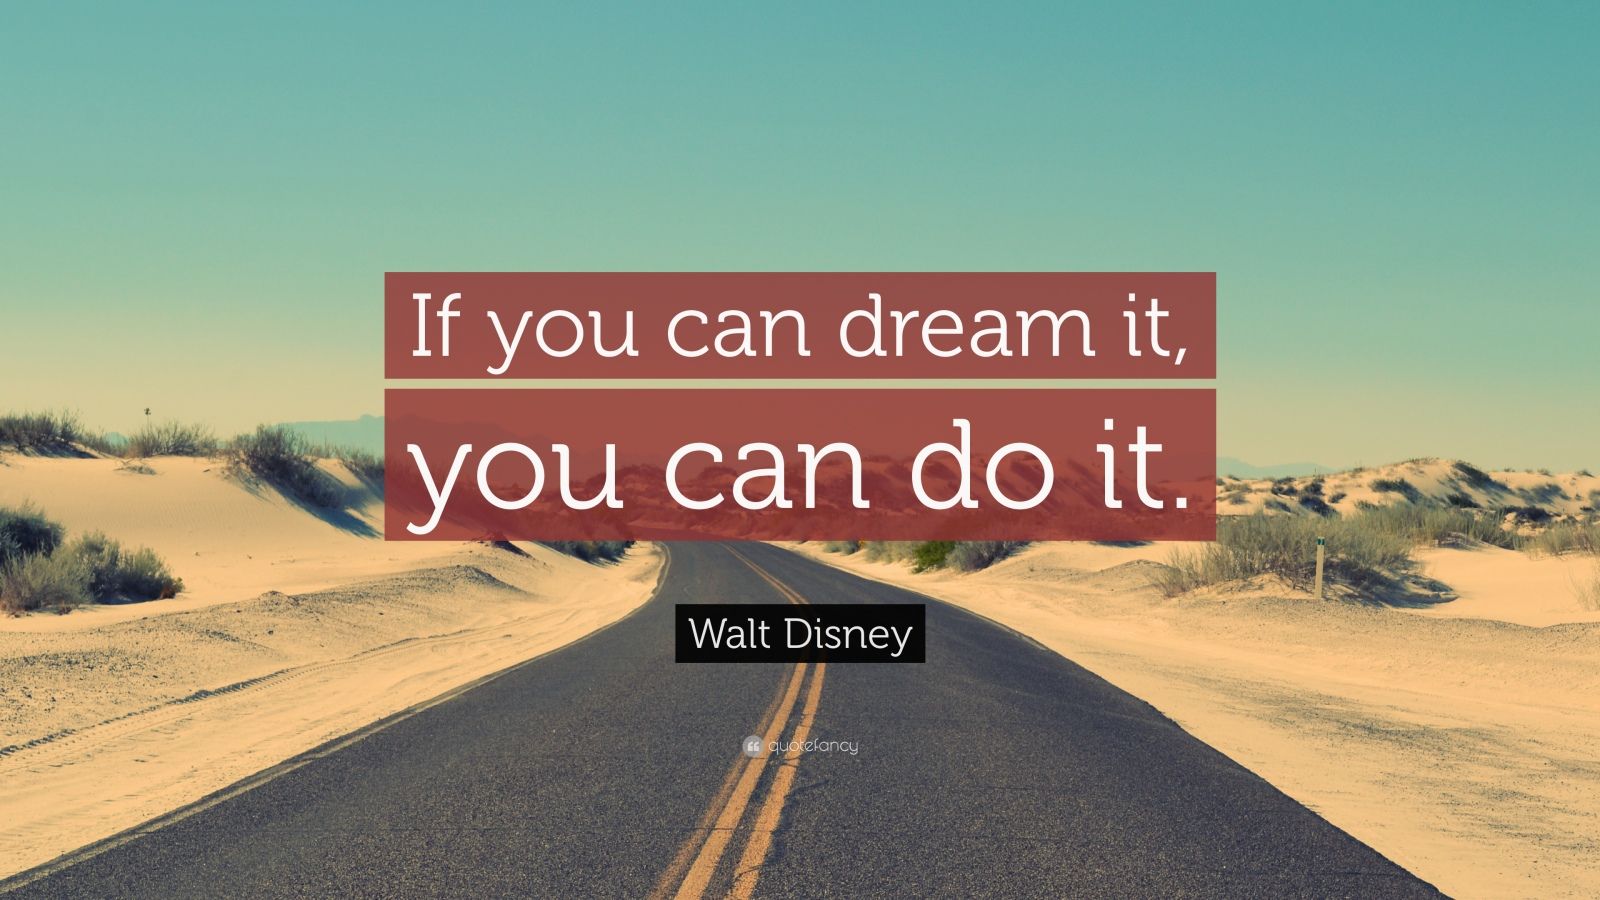 Walt Disney Quote “If you can dream it, you can do it